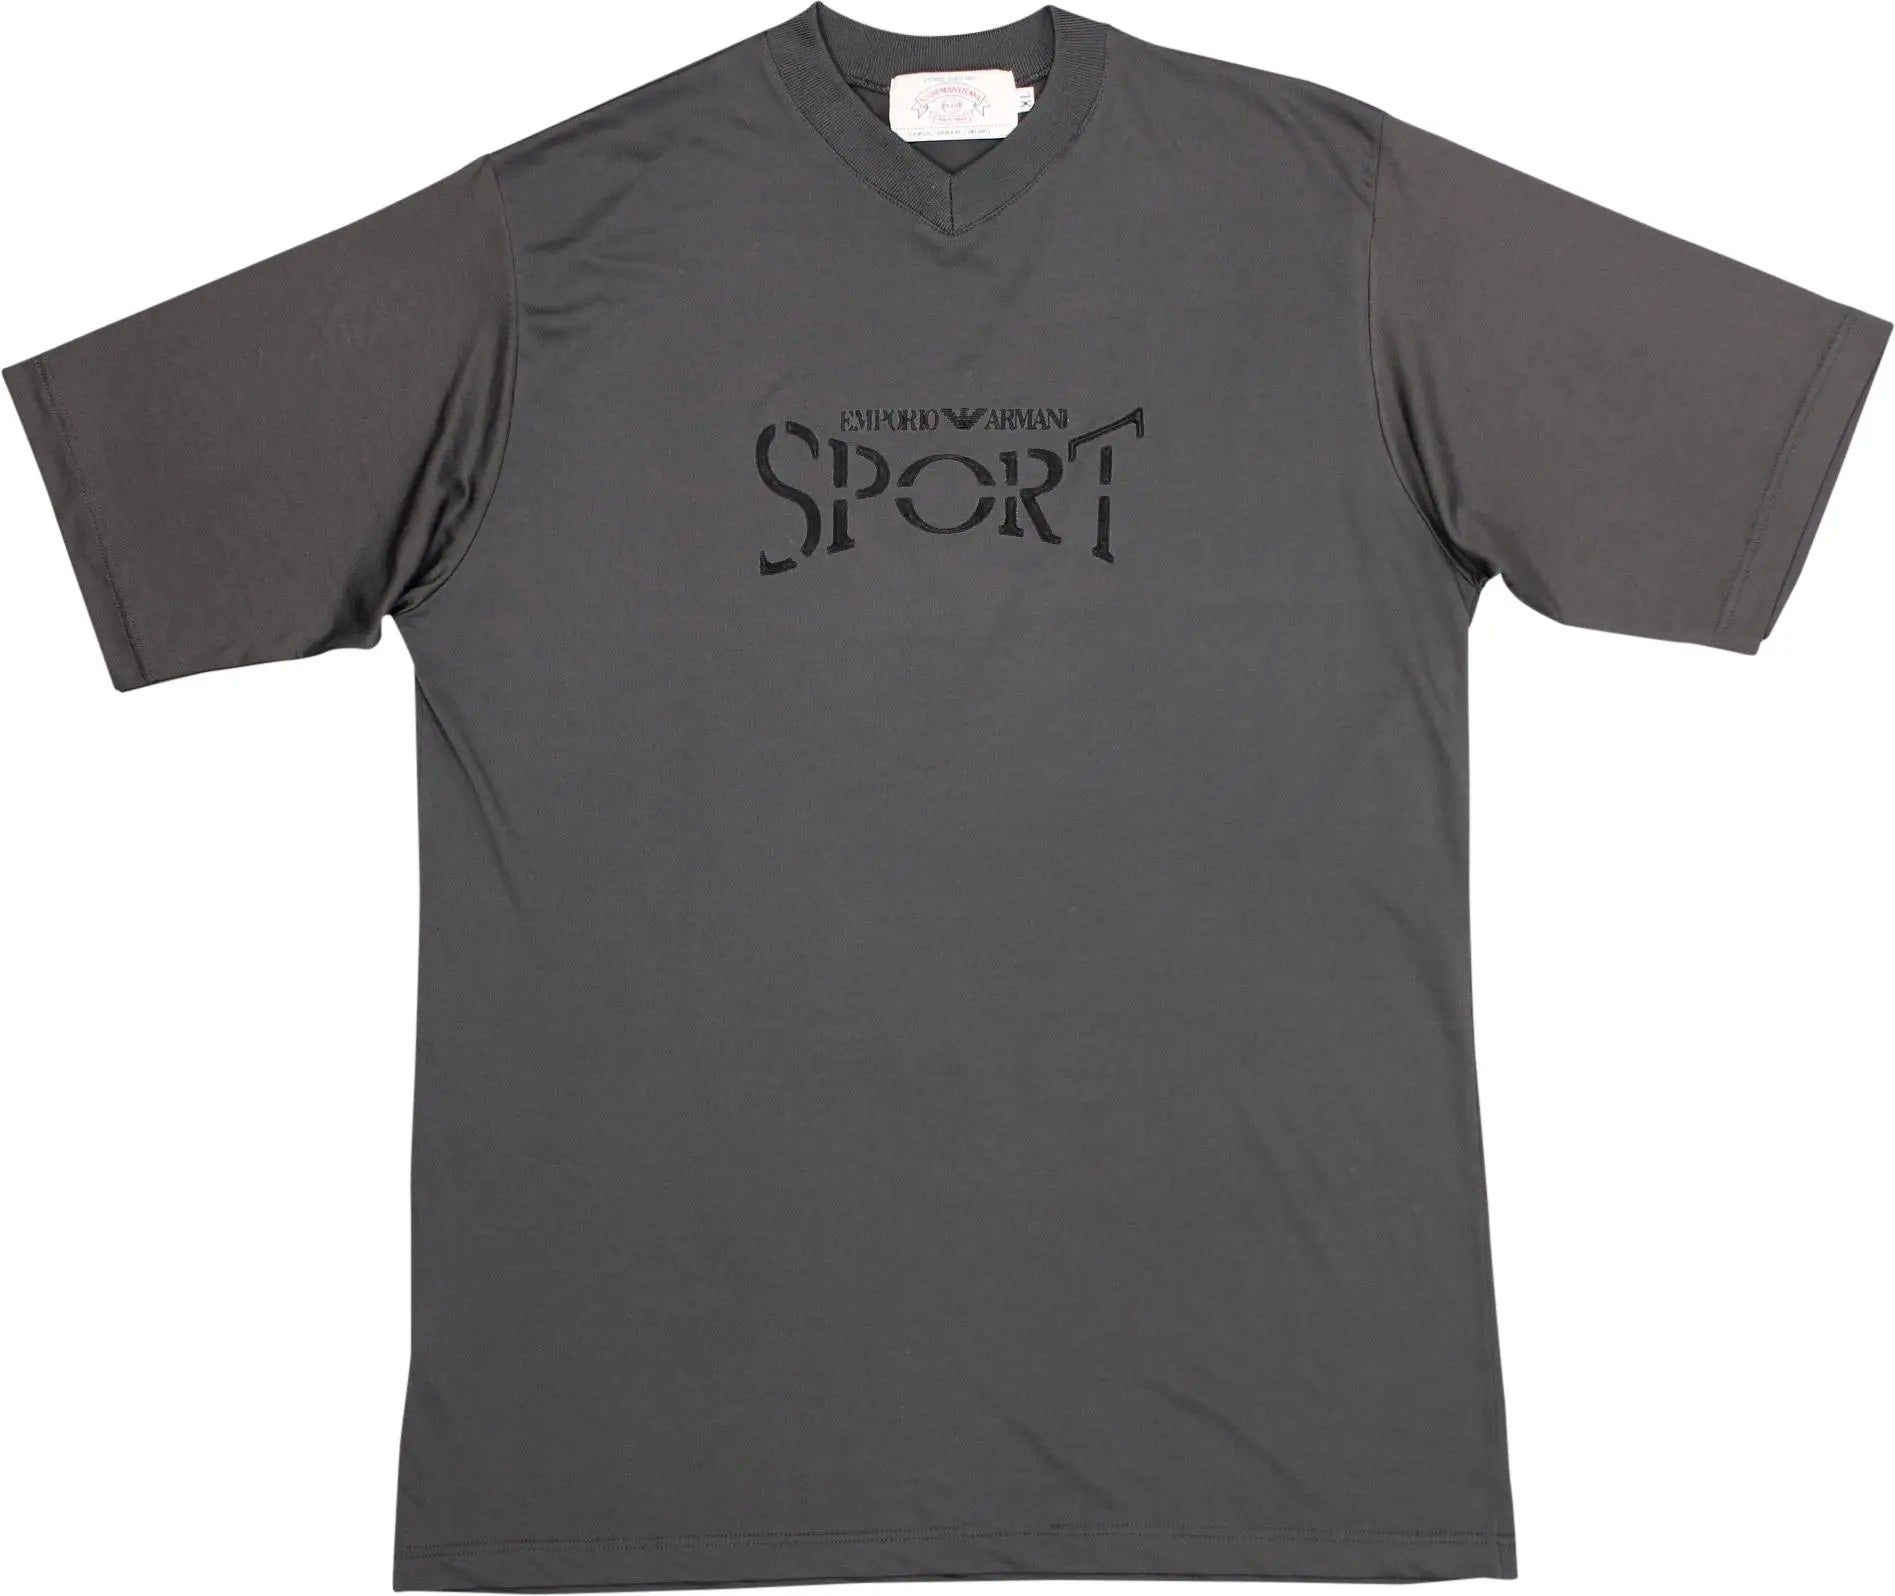 Armani Jeans - Grey T-shirt by Emporio Armani Sport- ThriftTale.com - Vintage and second handclothing